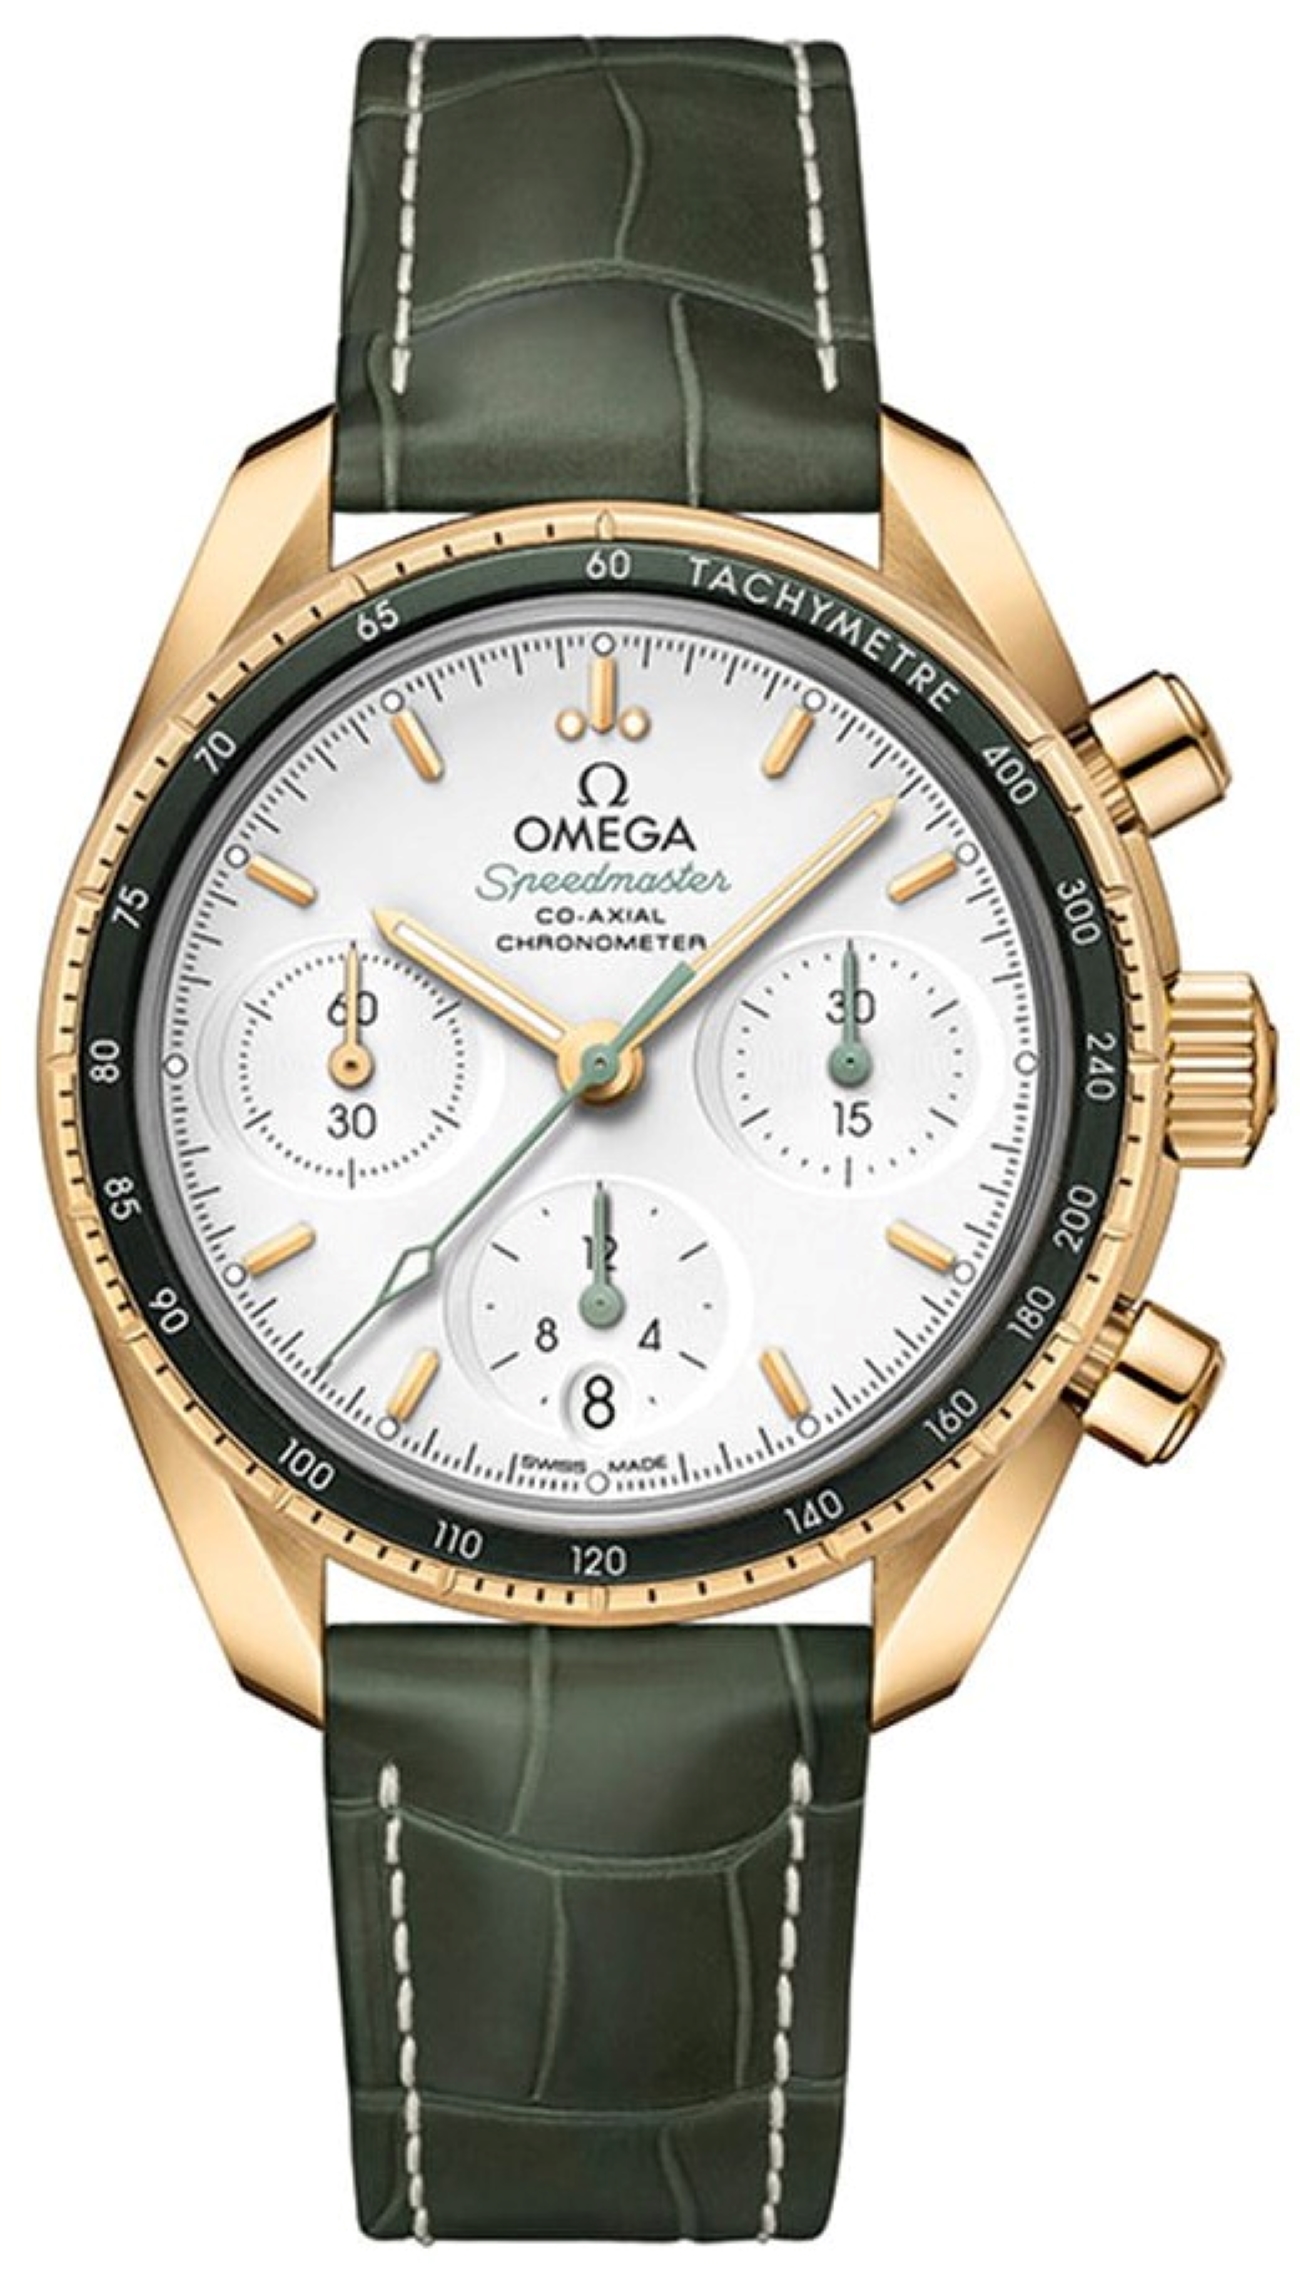 OMEGA SPEEDMASTER 38 CO-AXIAL CHRONOMETER CHRONOGRAPH 38MM, YELLOW GOLD ON LEATHER STRAP, REF: 324.68.38.50.02.004